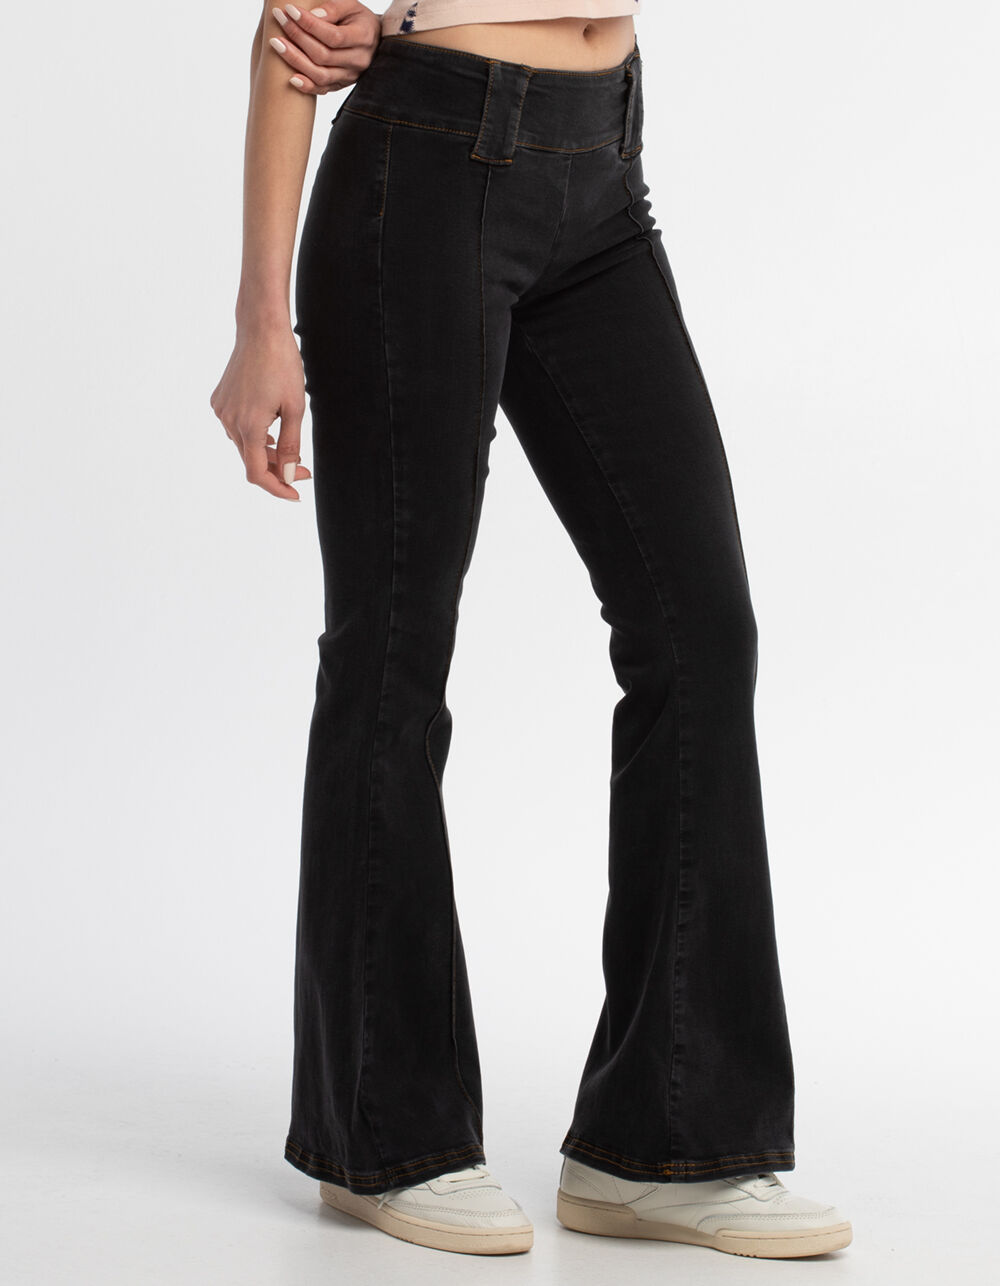 BDG Reese Low-rise Flare Jean In Black Lyst, 47% OFF